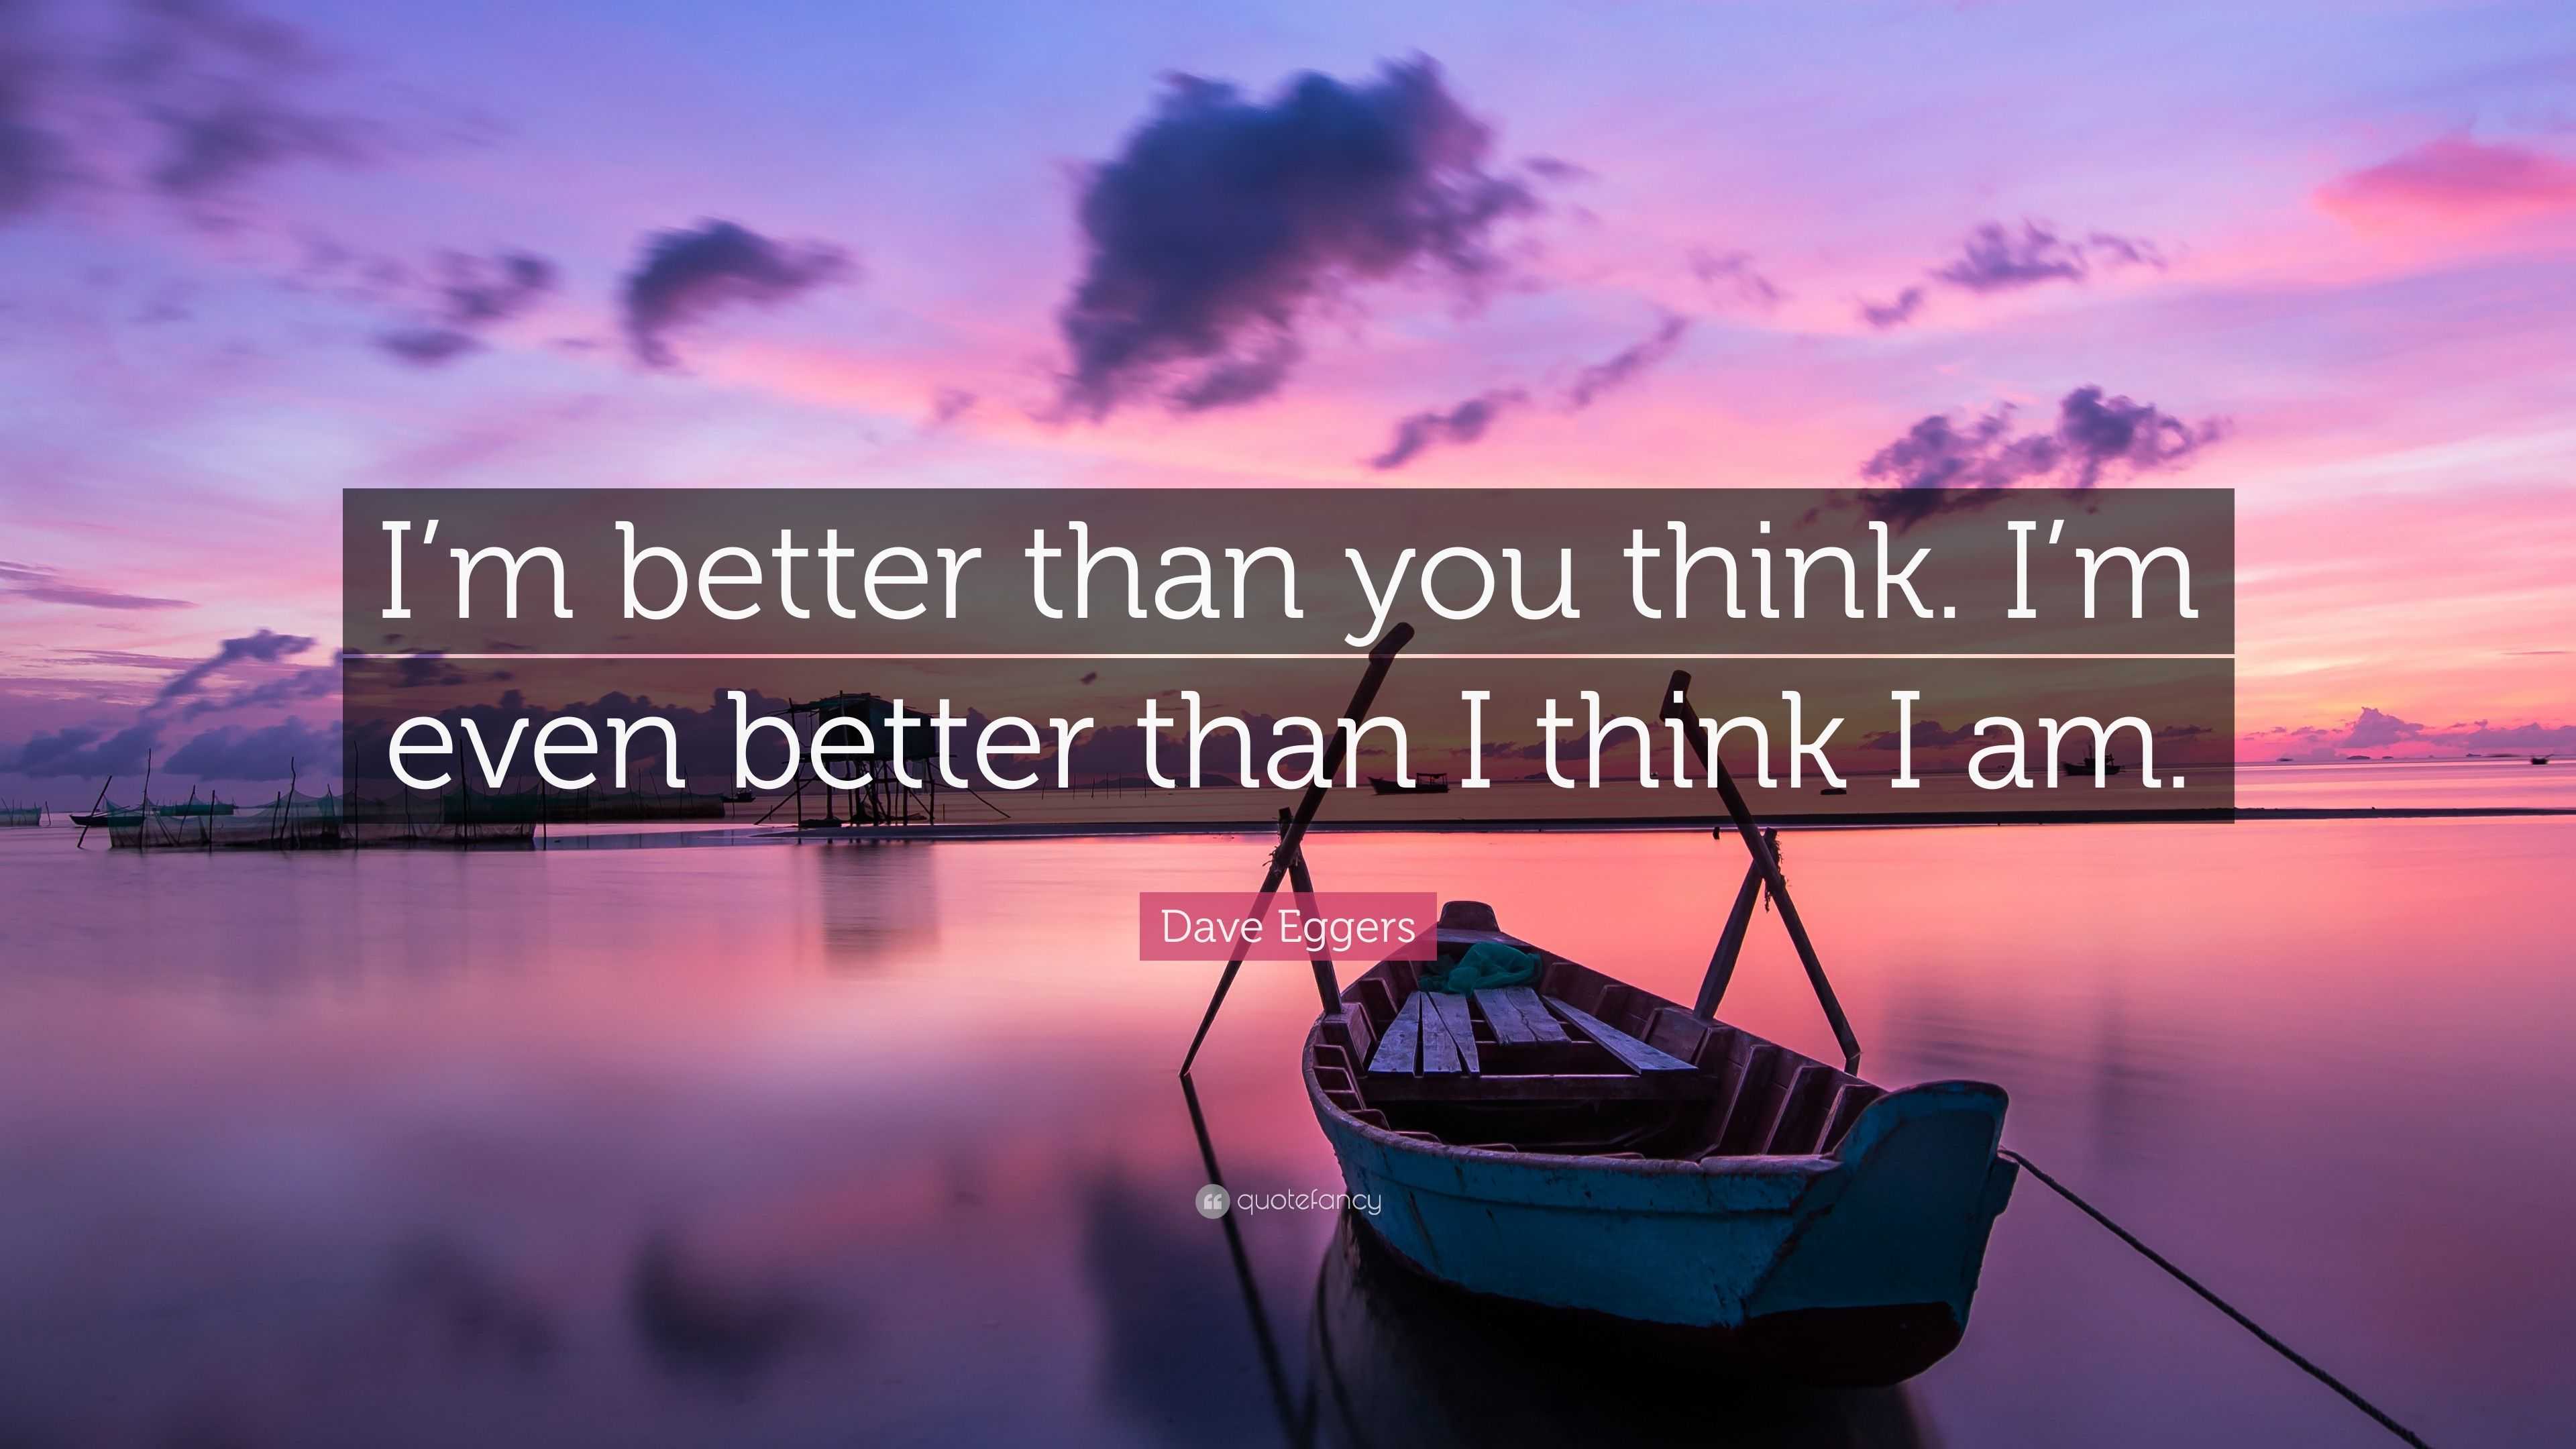 Dave Eggers Quote: “I’m better than you think. I’m even better than I